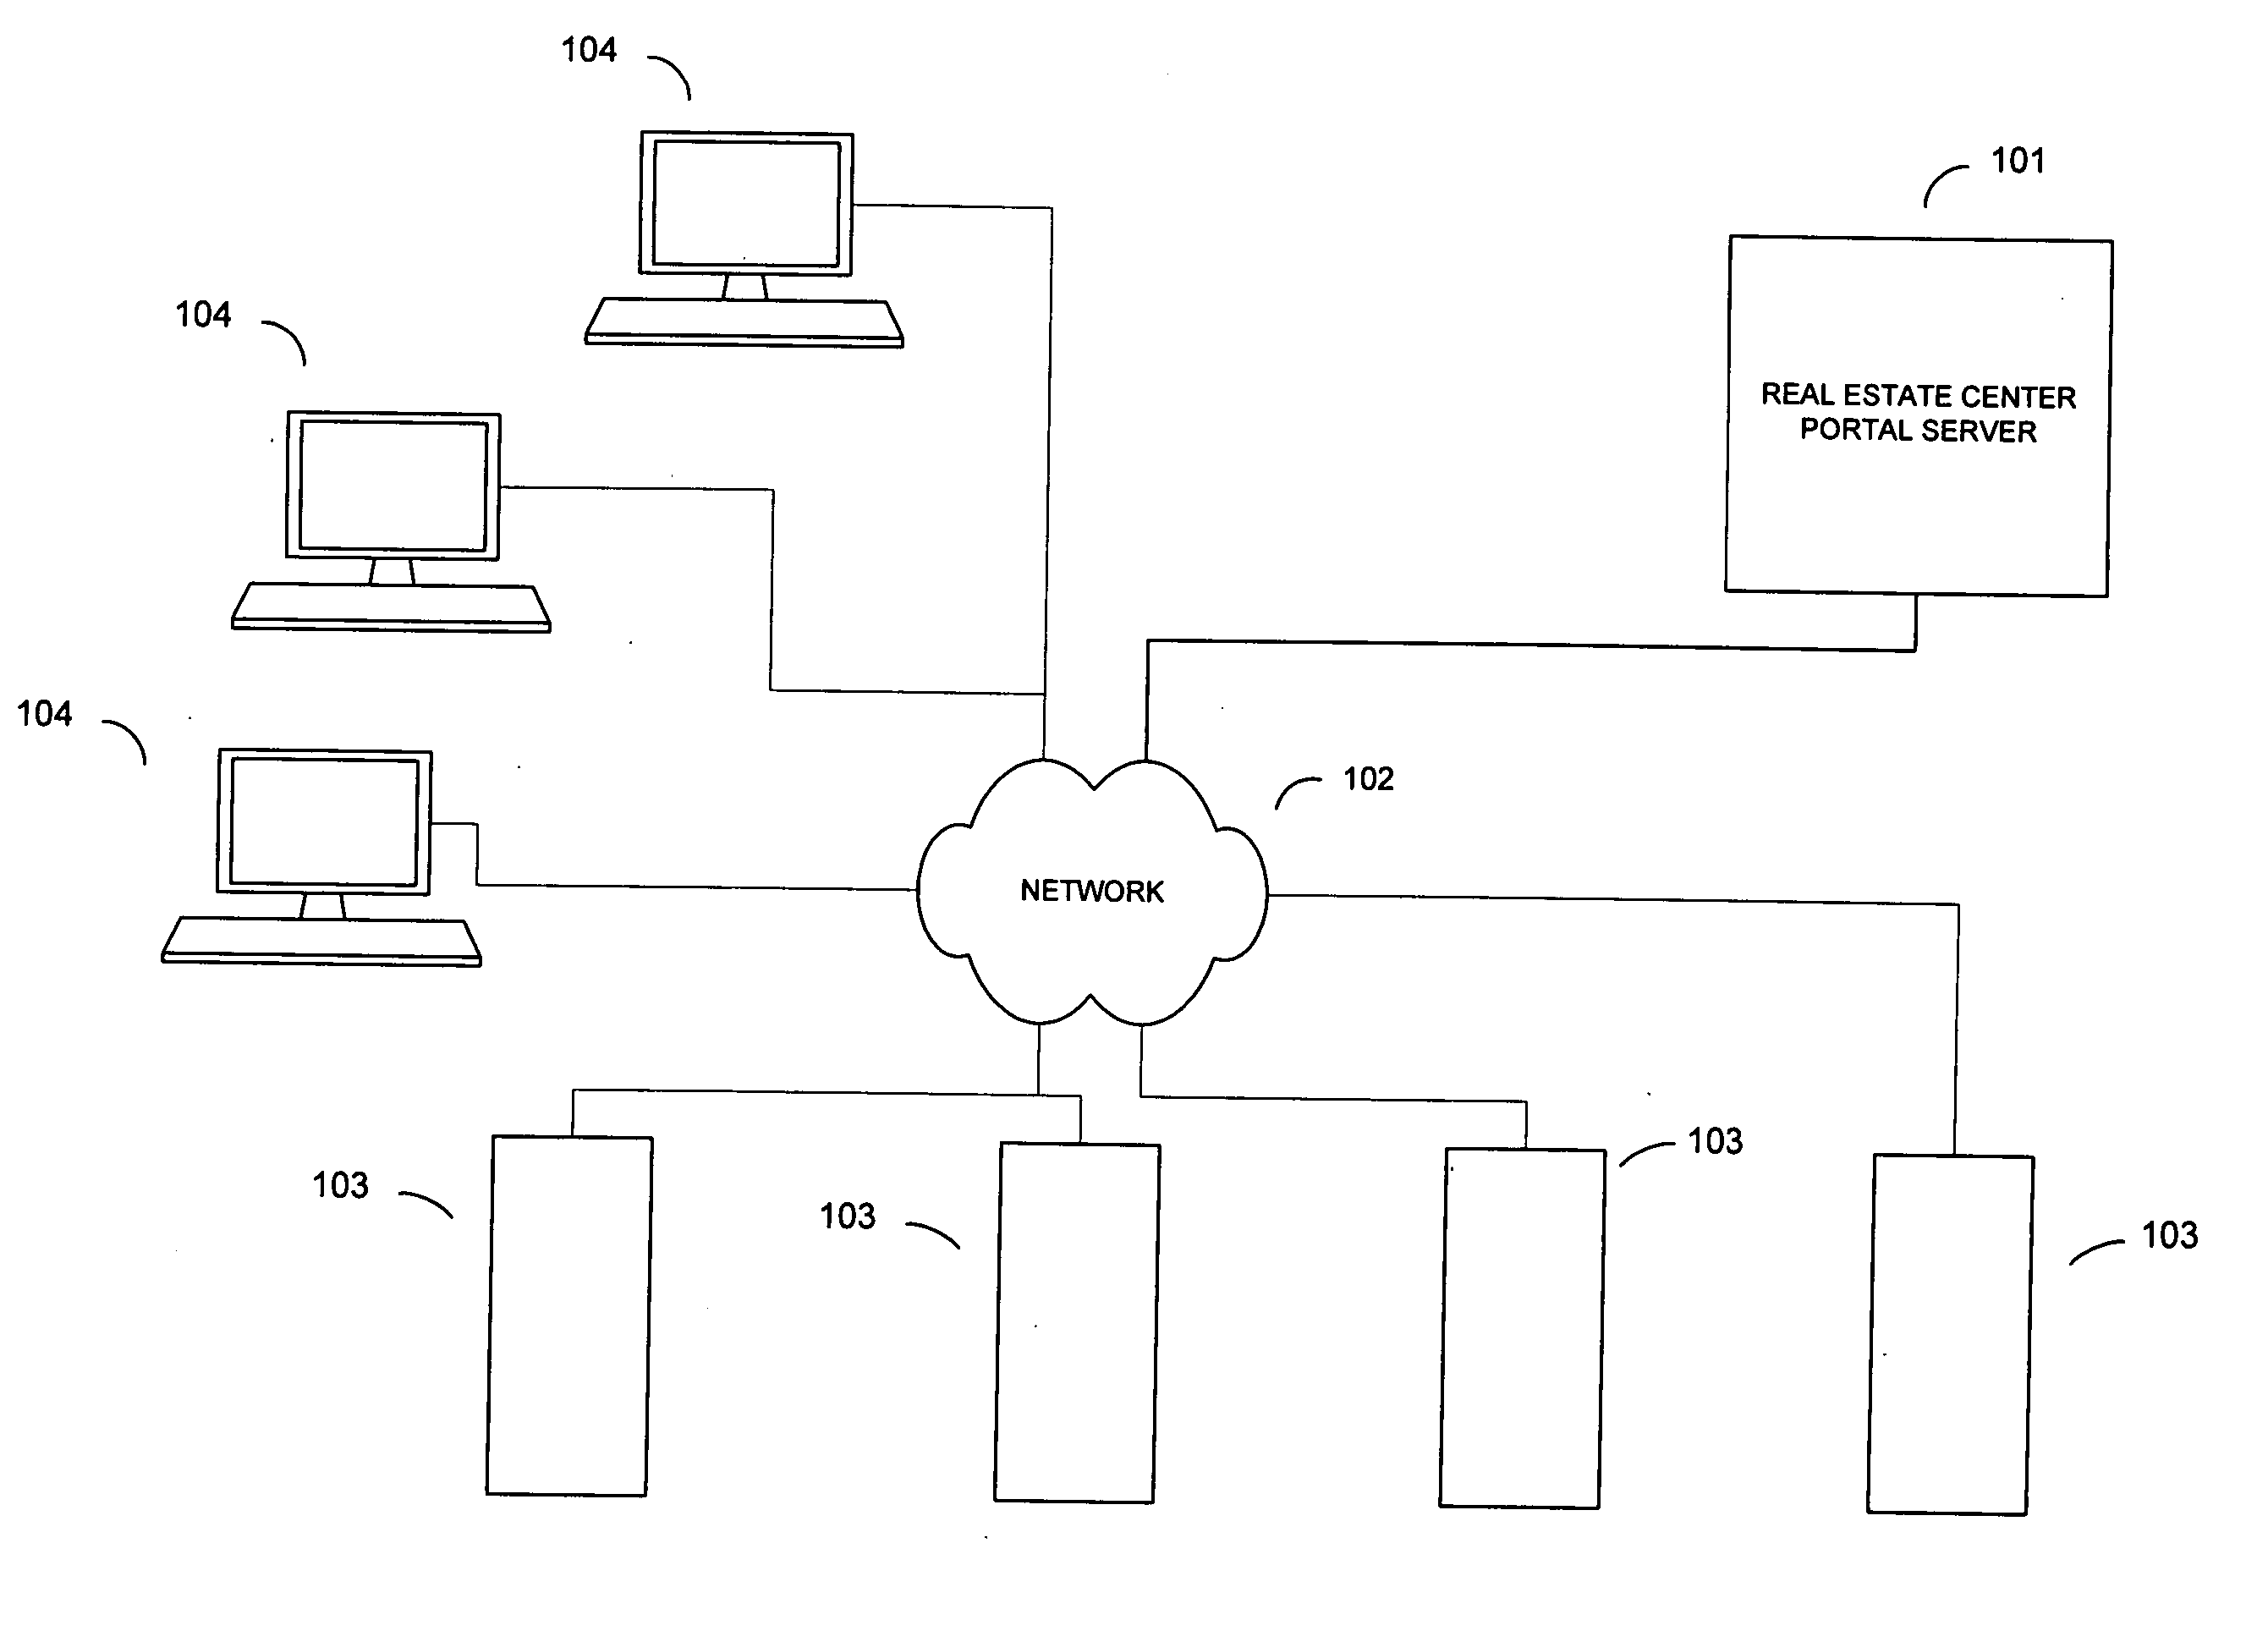 Method and system of managing an online reservation system for real estate properties